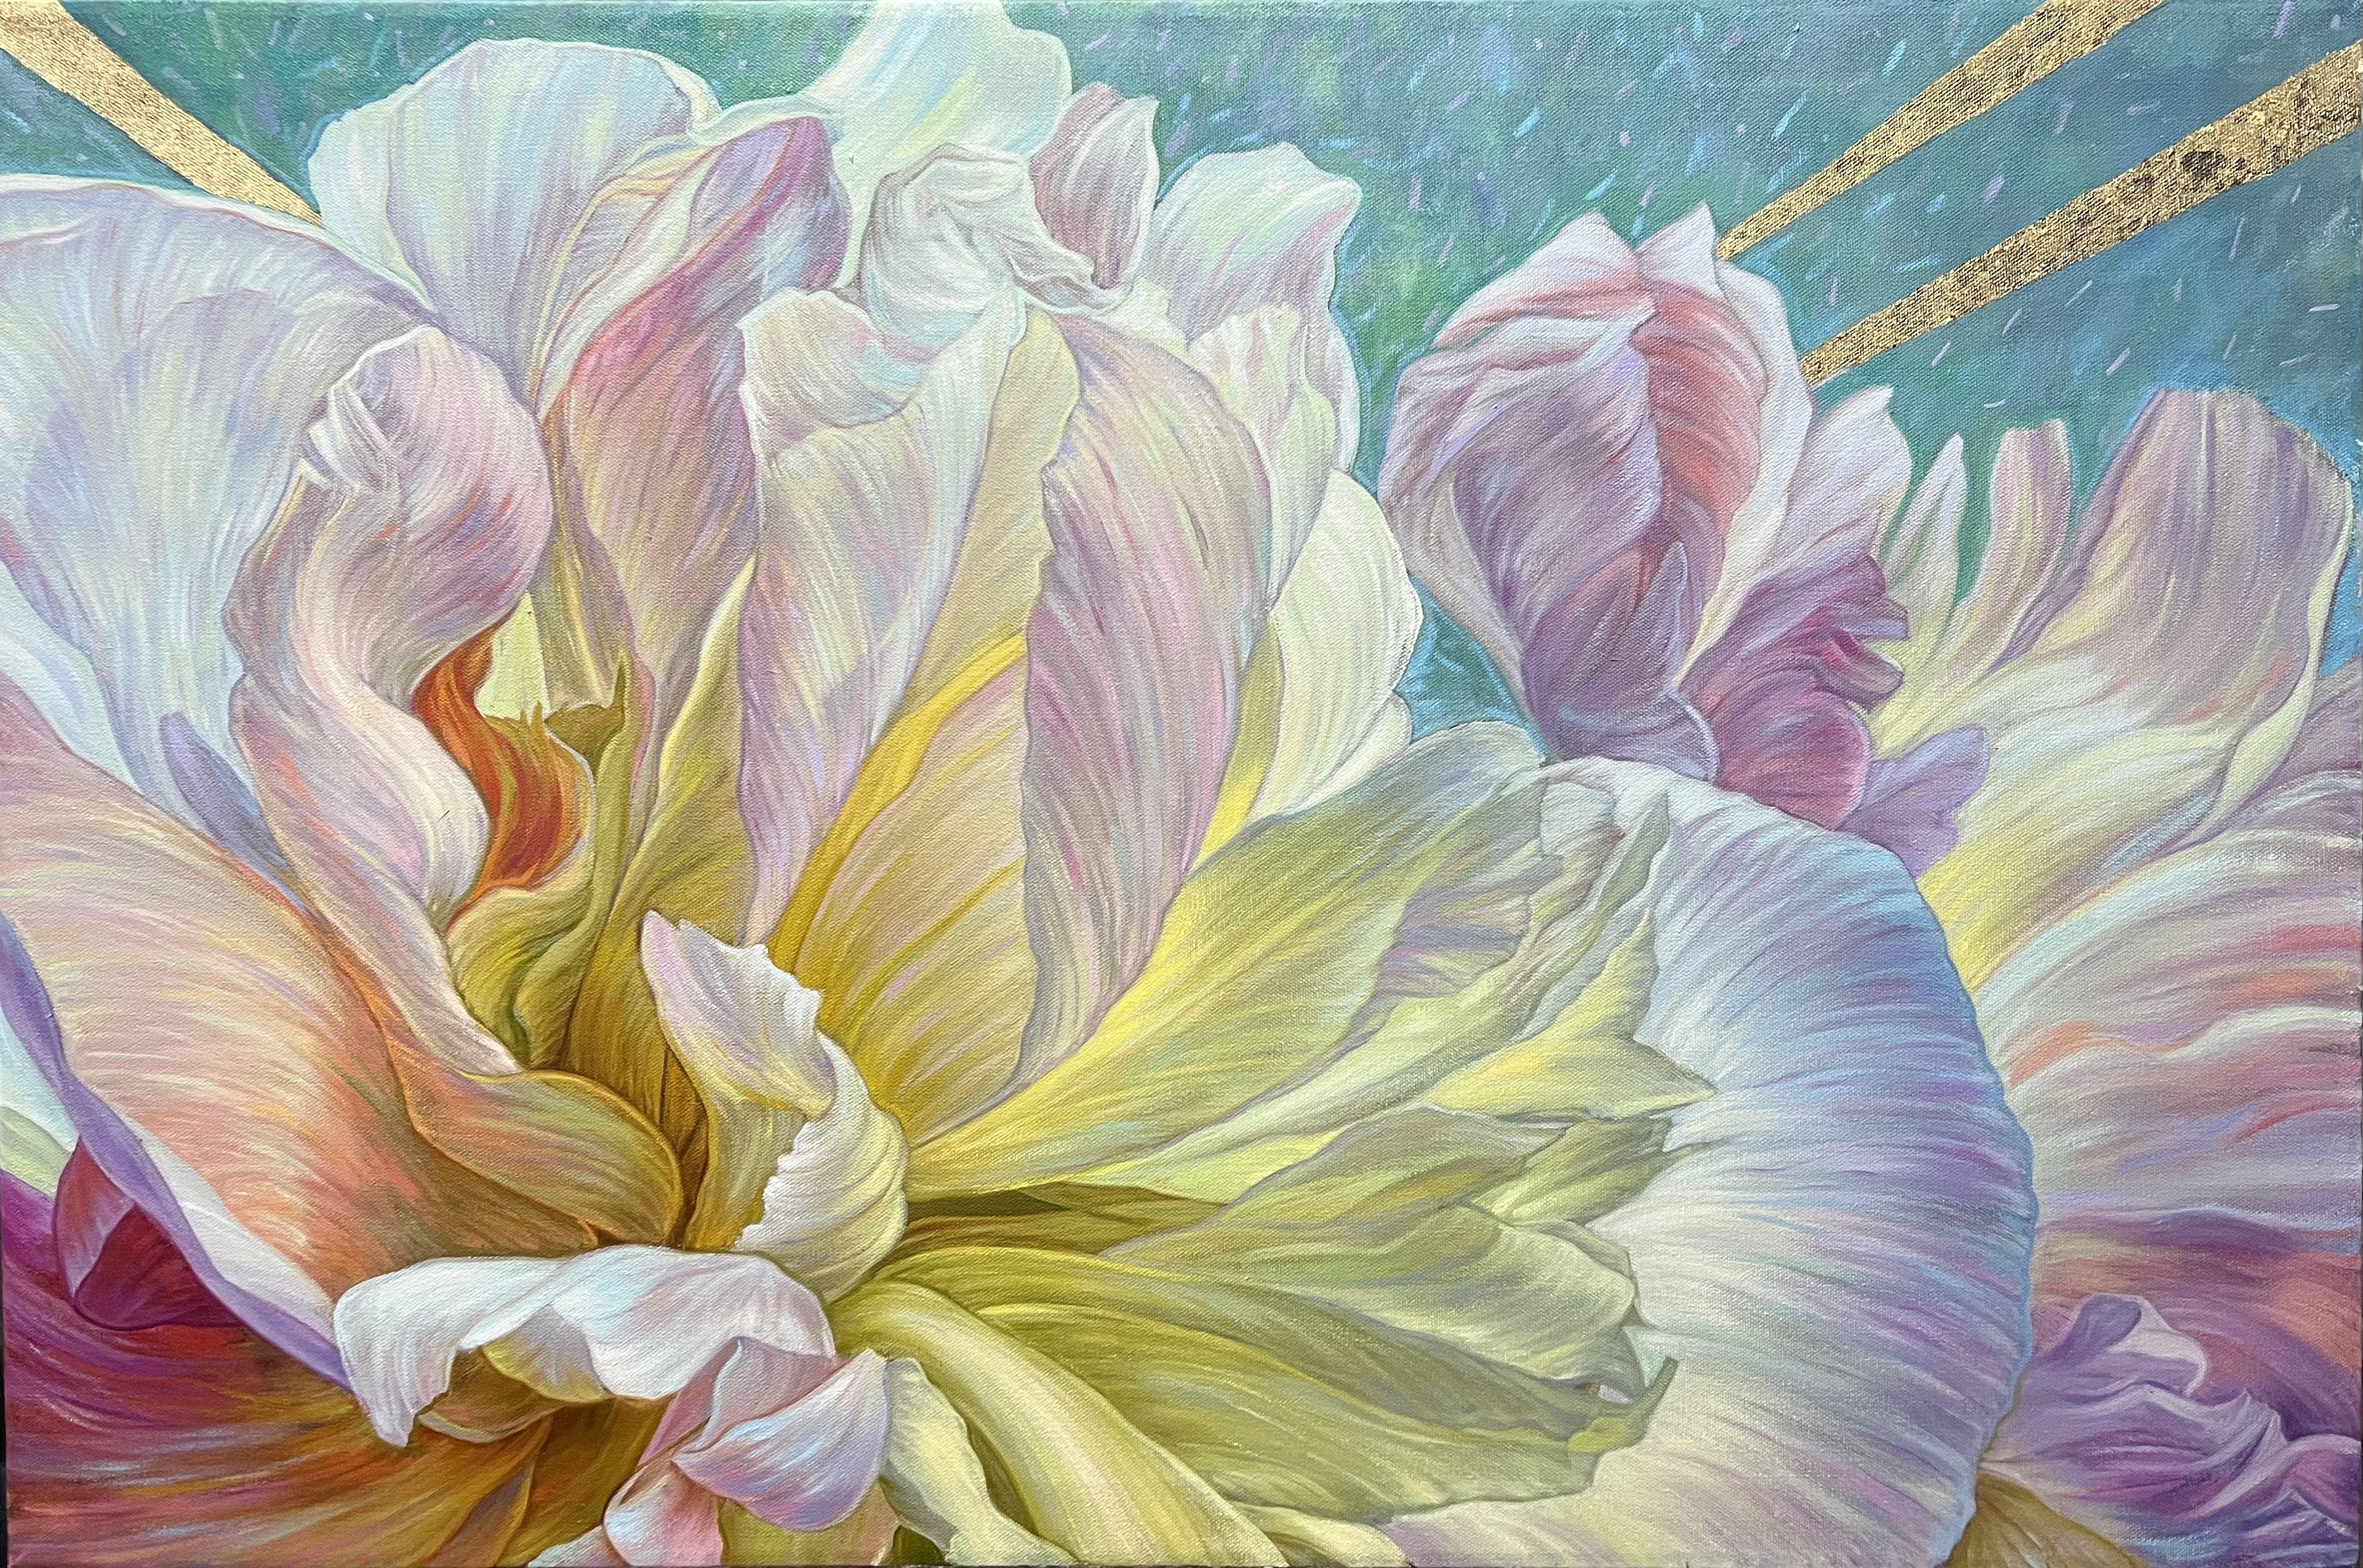 Flowers with delightful iridescences of shades and semitones. The background is filled with acrylic, the rays are gold leaf . 2023  :: Painting :: Realism :: This piece comes with an official certificate of authenticity signed by the artist :: Ready